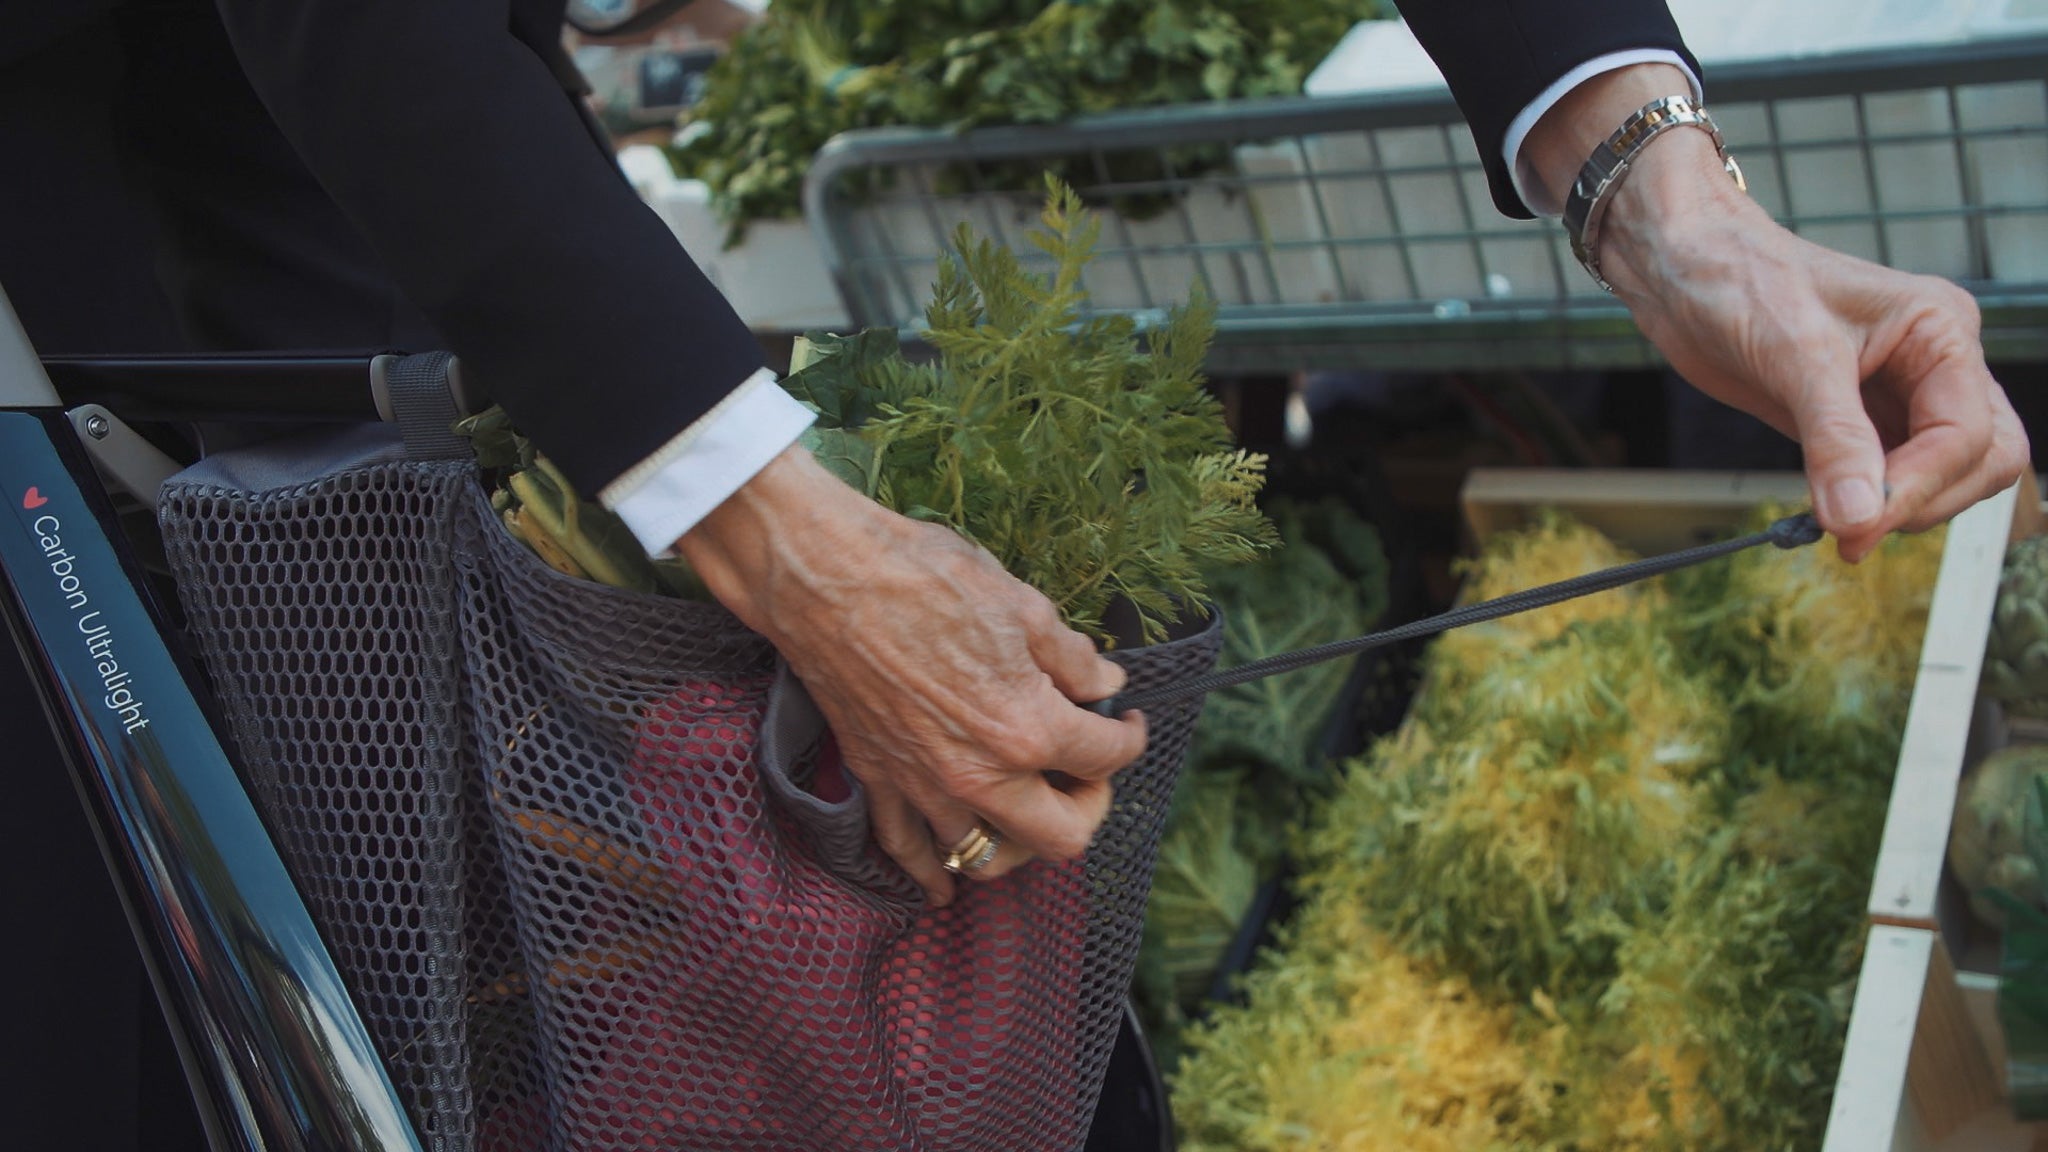 A close up of a mesh shopping bag attached to a walking frame. The bag is carrying carrots and is being closed by a woman's hands.